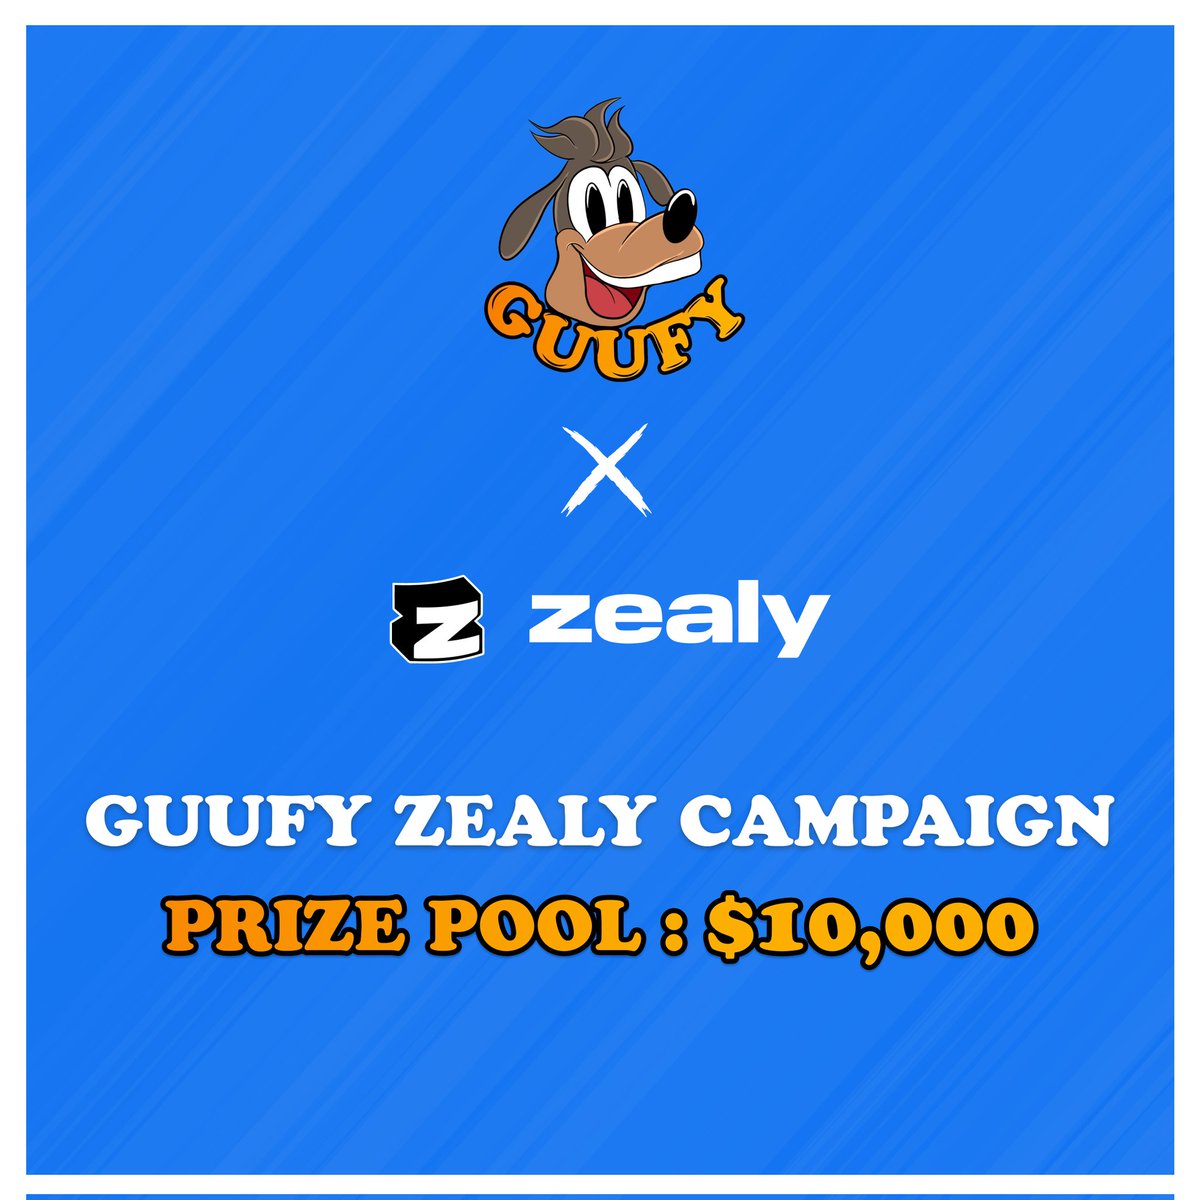 Join the #GuufyForPresident @zealy_io movement! 💰 Over $10,000 in Prizes! 💰 We're on a mission to the White House and need your help! Are you ready to be part of something big? 🔗 zealy.io/cw/guufy/invit… ⏳ Duration: 1 month #Guufy #Giveaway